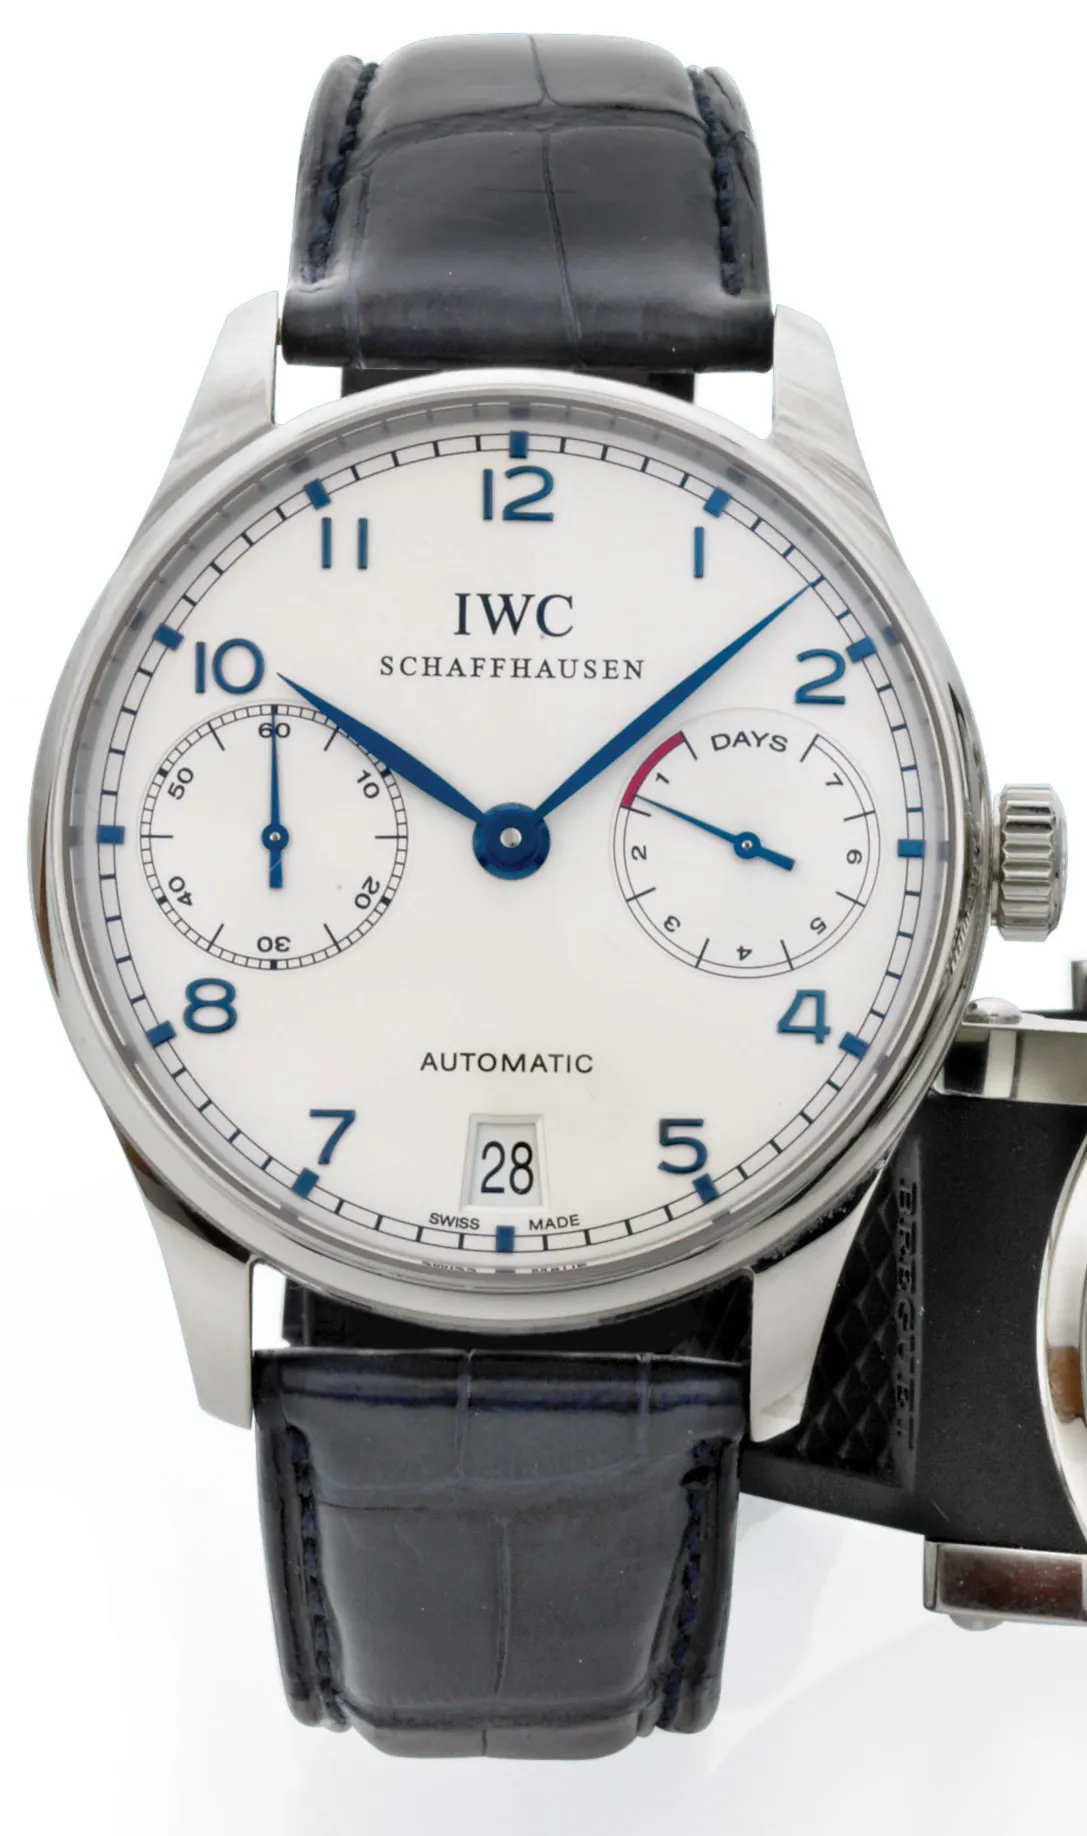 IWC Portugieser 500107 42mm Stainless steel Silver